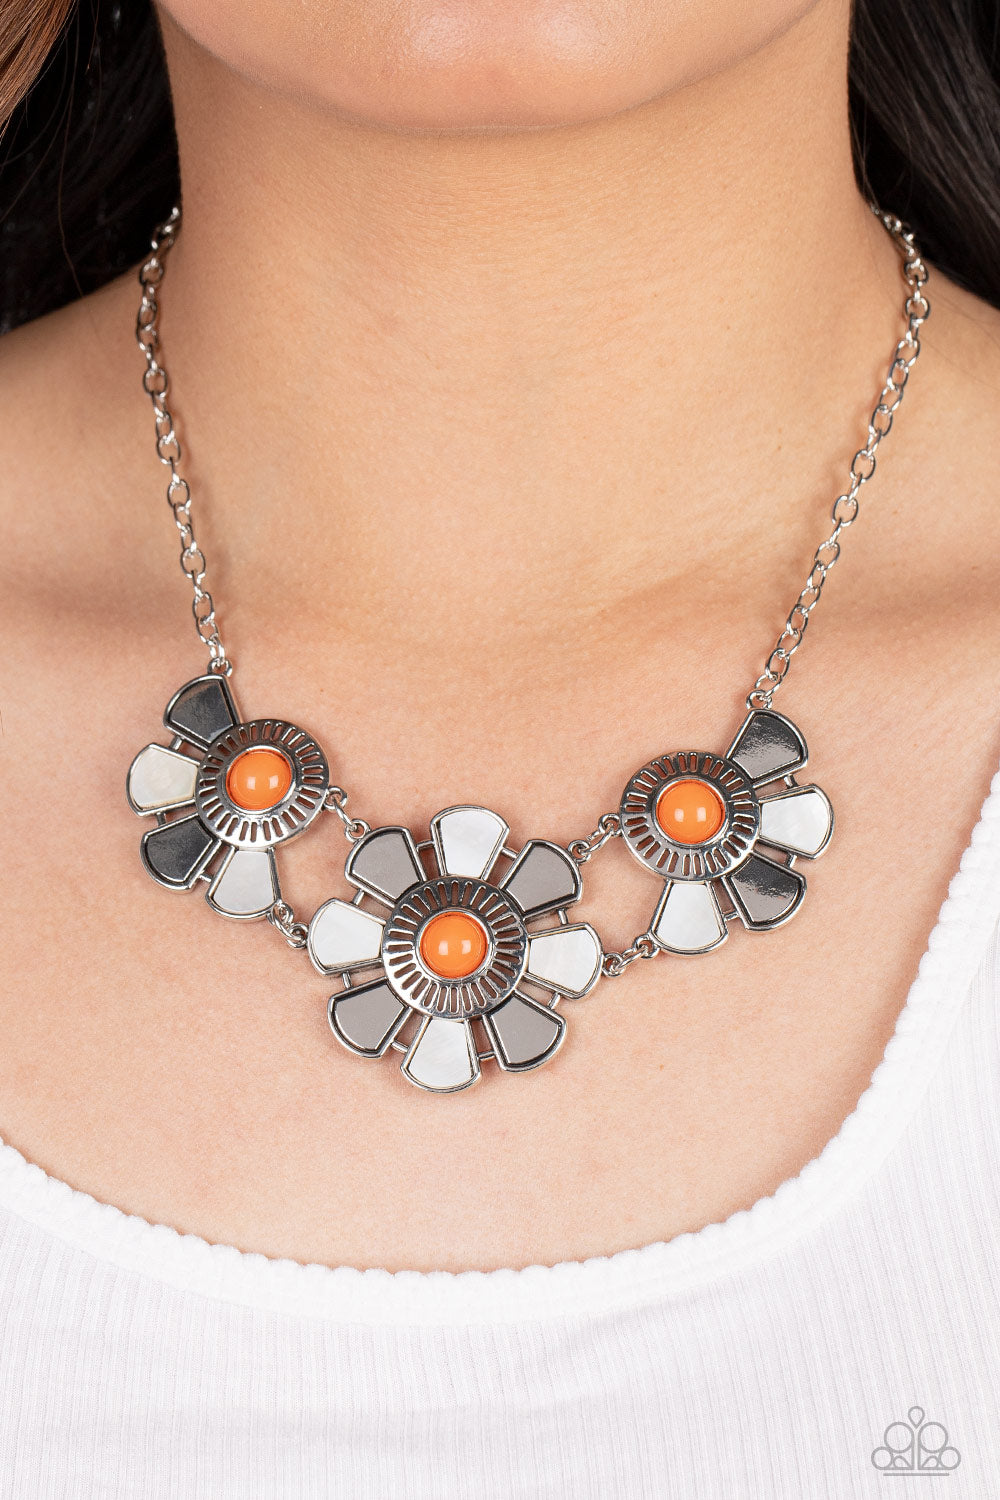 Aquatic Garden Orange Necklace - Paparazzi Accessories Item #P2ST-OGXX-106XX Dotted with orange bead centers, silver and white shell-like petals fan out from an airy metal frame. The trio of whimsically industrial flowers connects to a conventional silver chain below the collar resulting in an unabashedly metropolitan display. Features an adjustable clasp closure.  Sold as one individual necklace. Includes one pair of matching earrings.